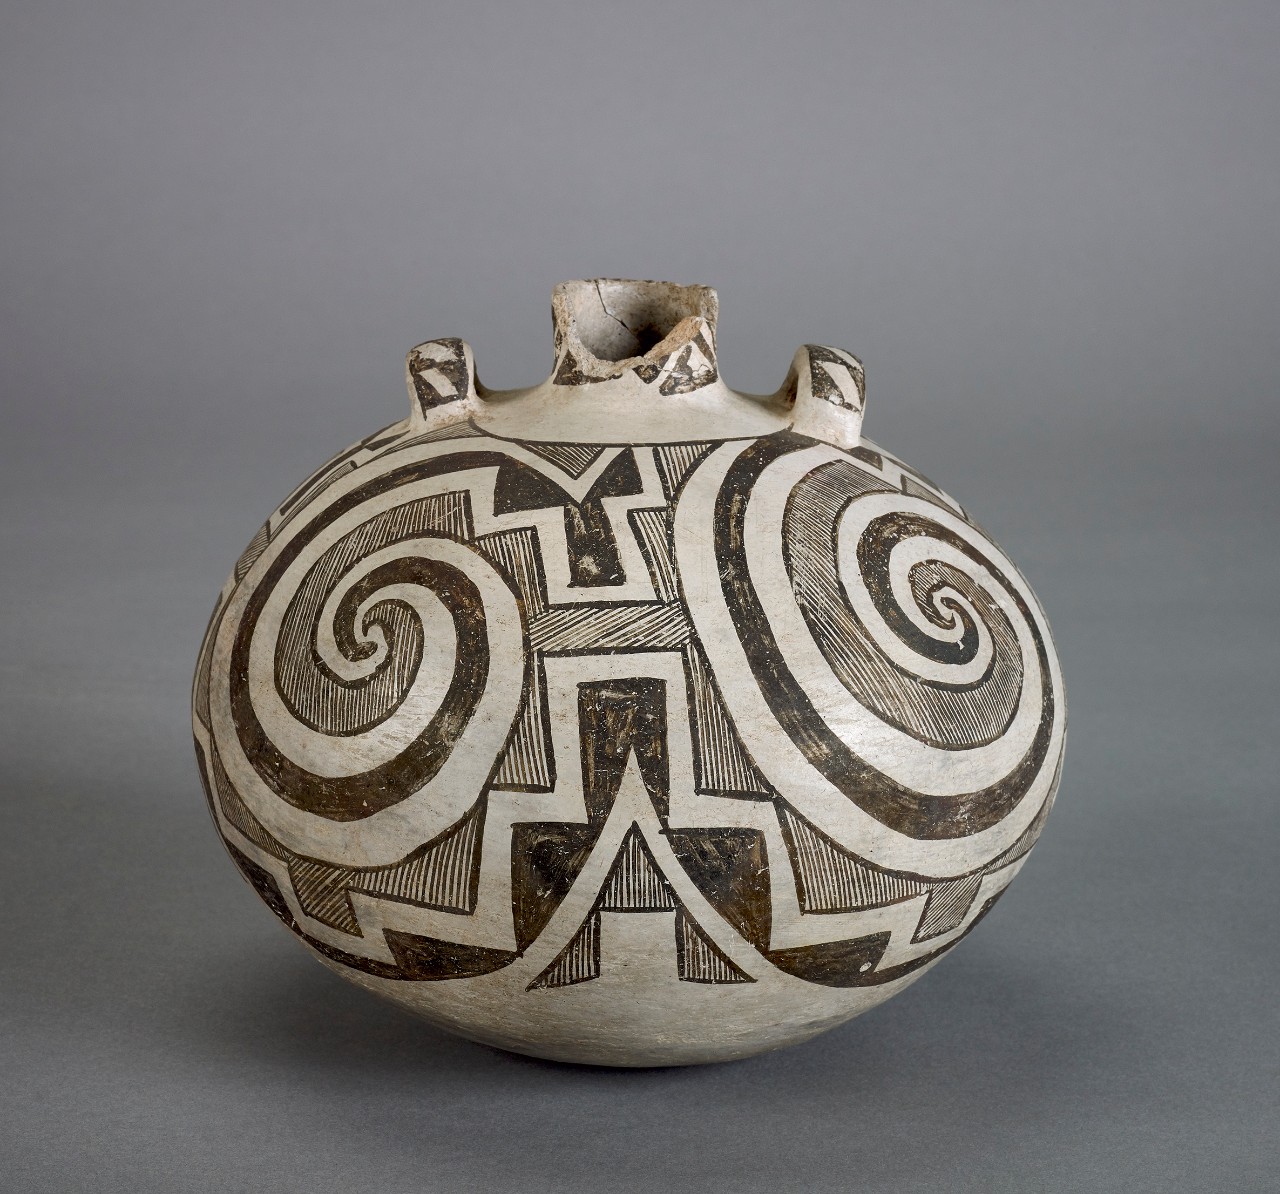 Unidentified Ancestral Puebloan artist, Water jug decorated with swirling patterns, ca. 1200, clay with pigment